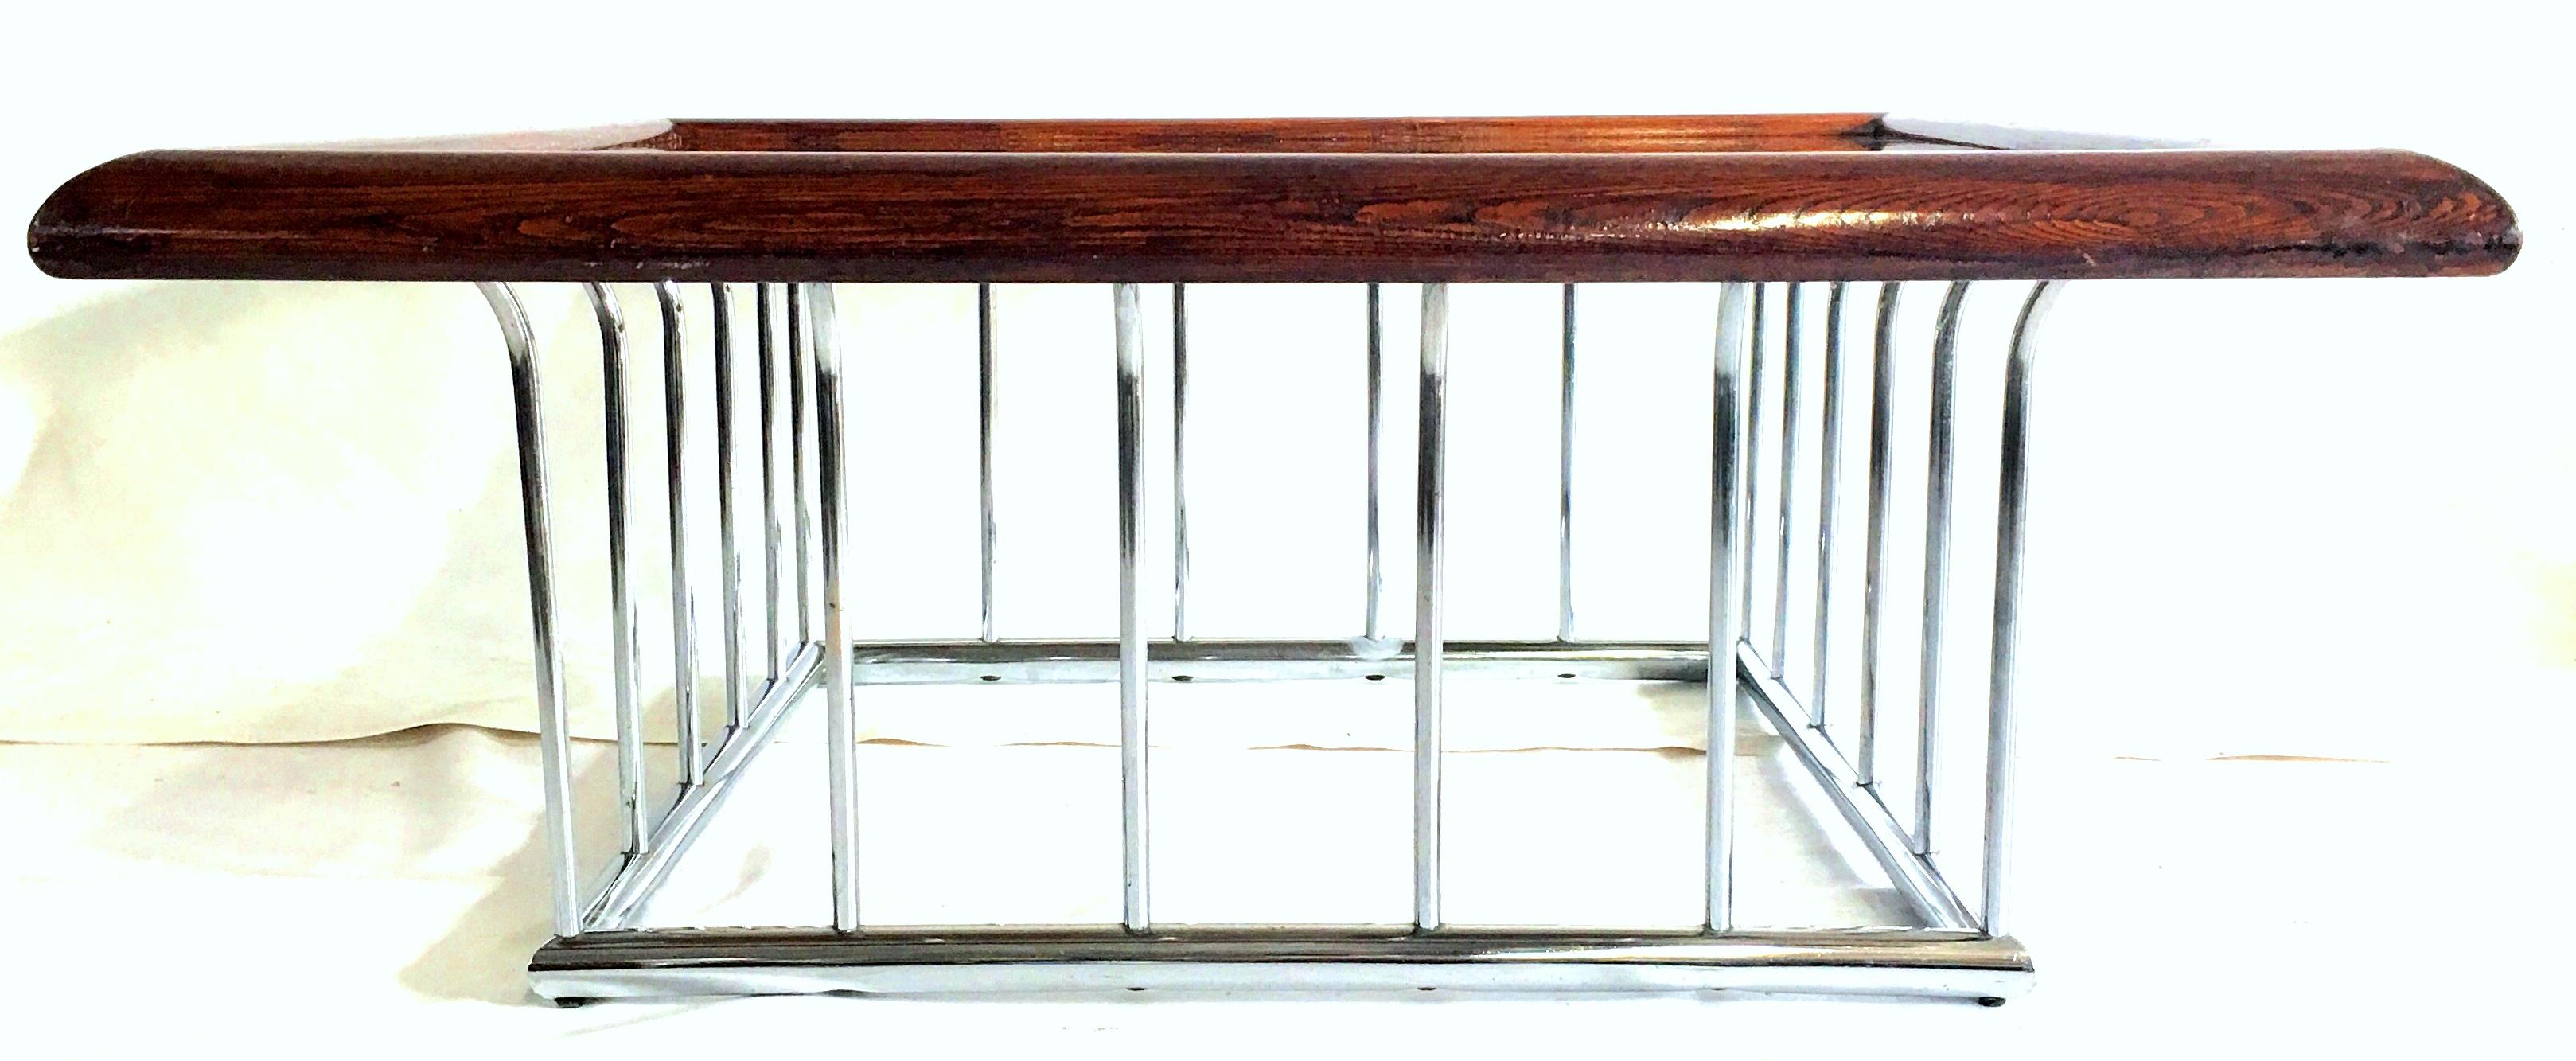 20th Century Milo Baughman Style Wood and Chrome Smoked Glass Top Coffee Table In Good Condition For Sale In West Palm Beach, FL